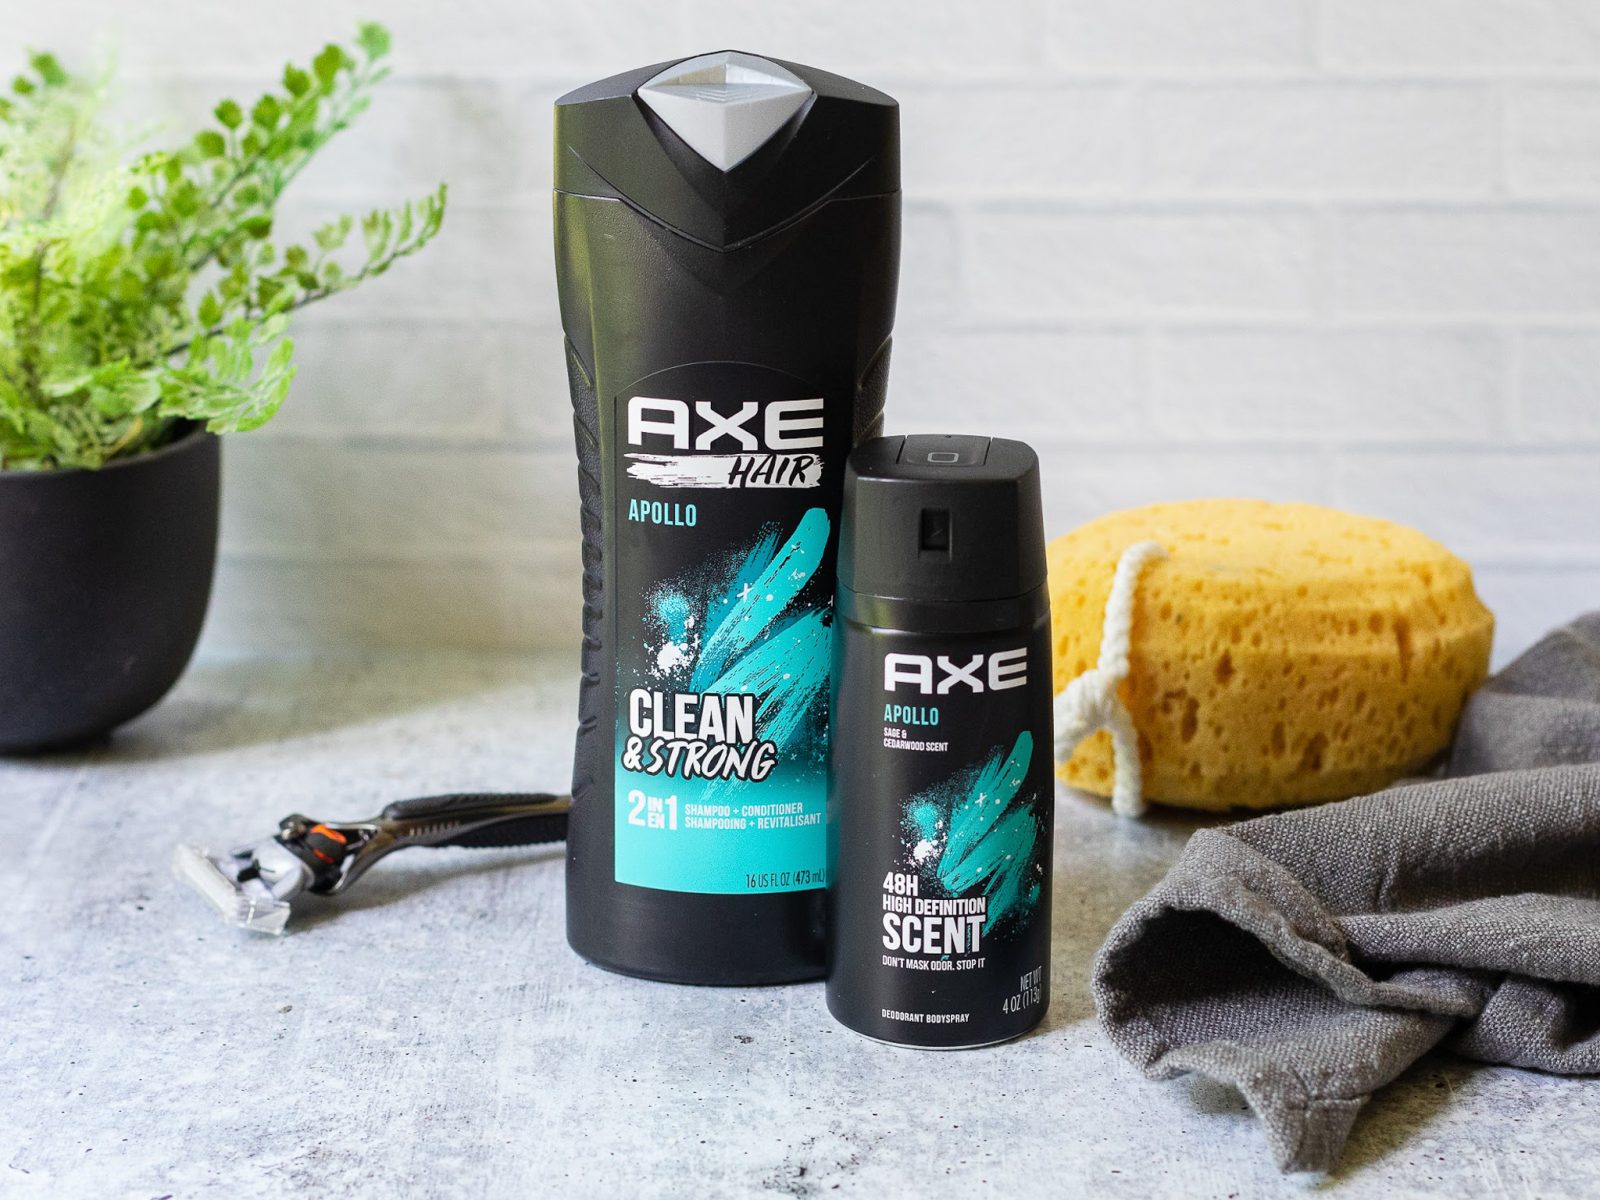 Get Axe Body Spray For As Low As $3.99 At Kroger (Regular Price $6.49)